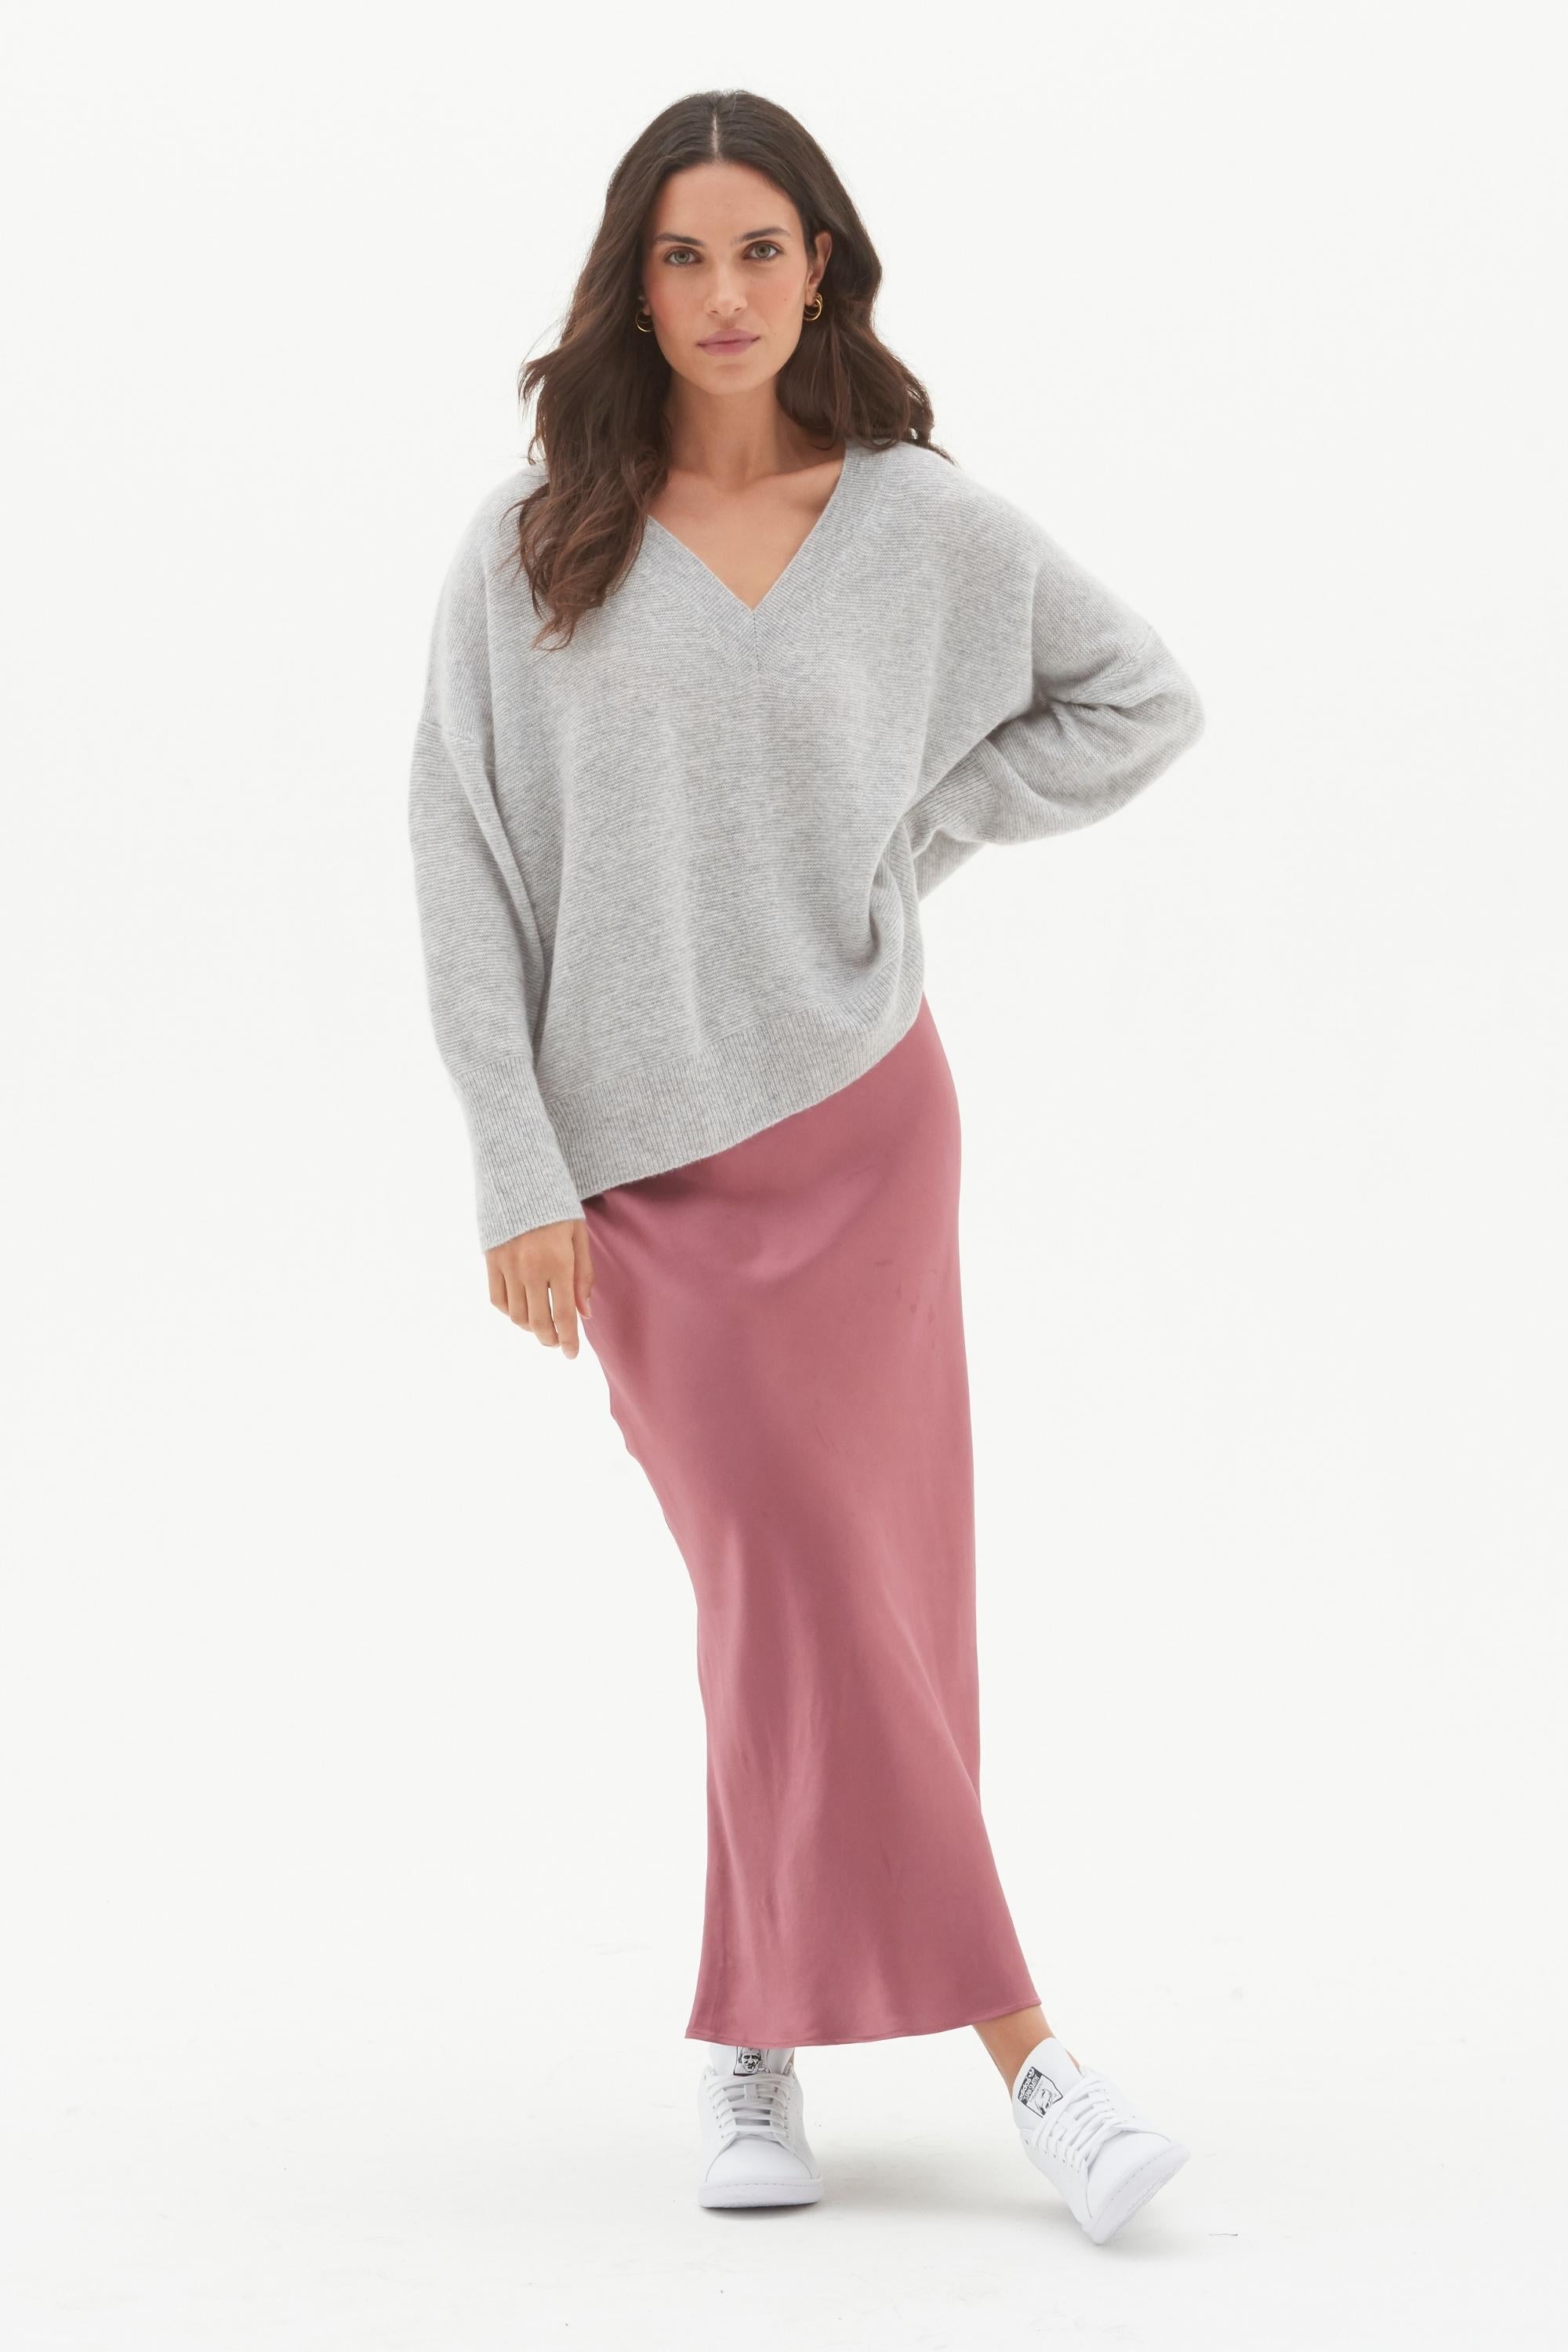 Relaxed V Neck Cashmere Sweater - Made to Order